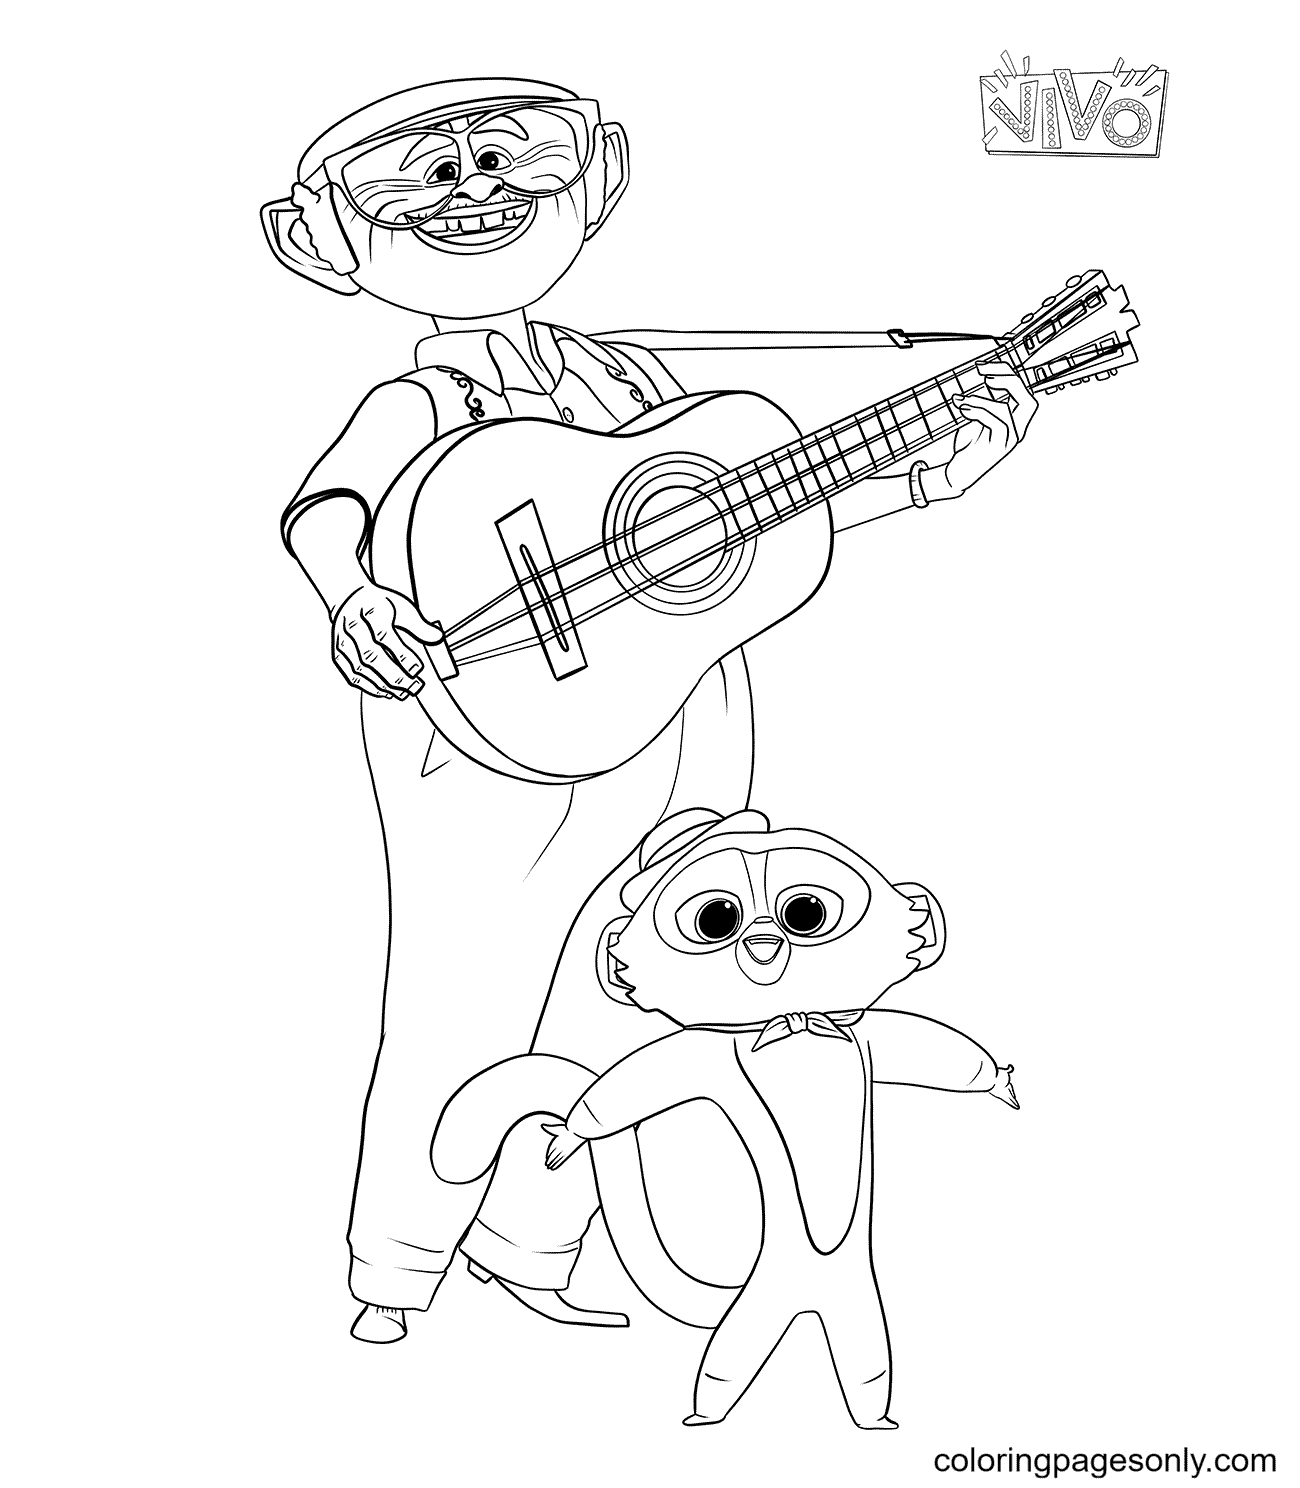 Andres and Vivo Coloring Pages